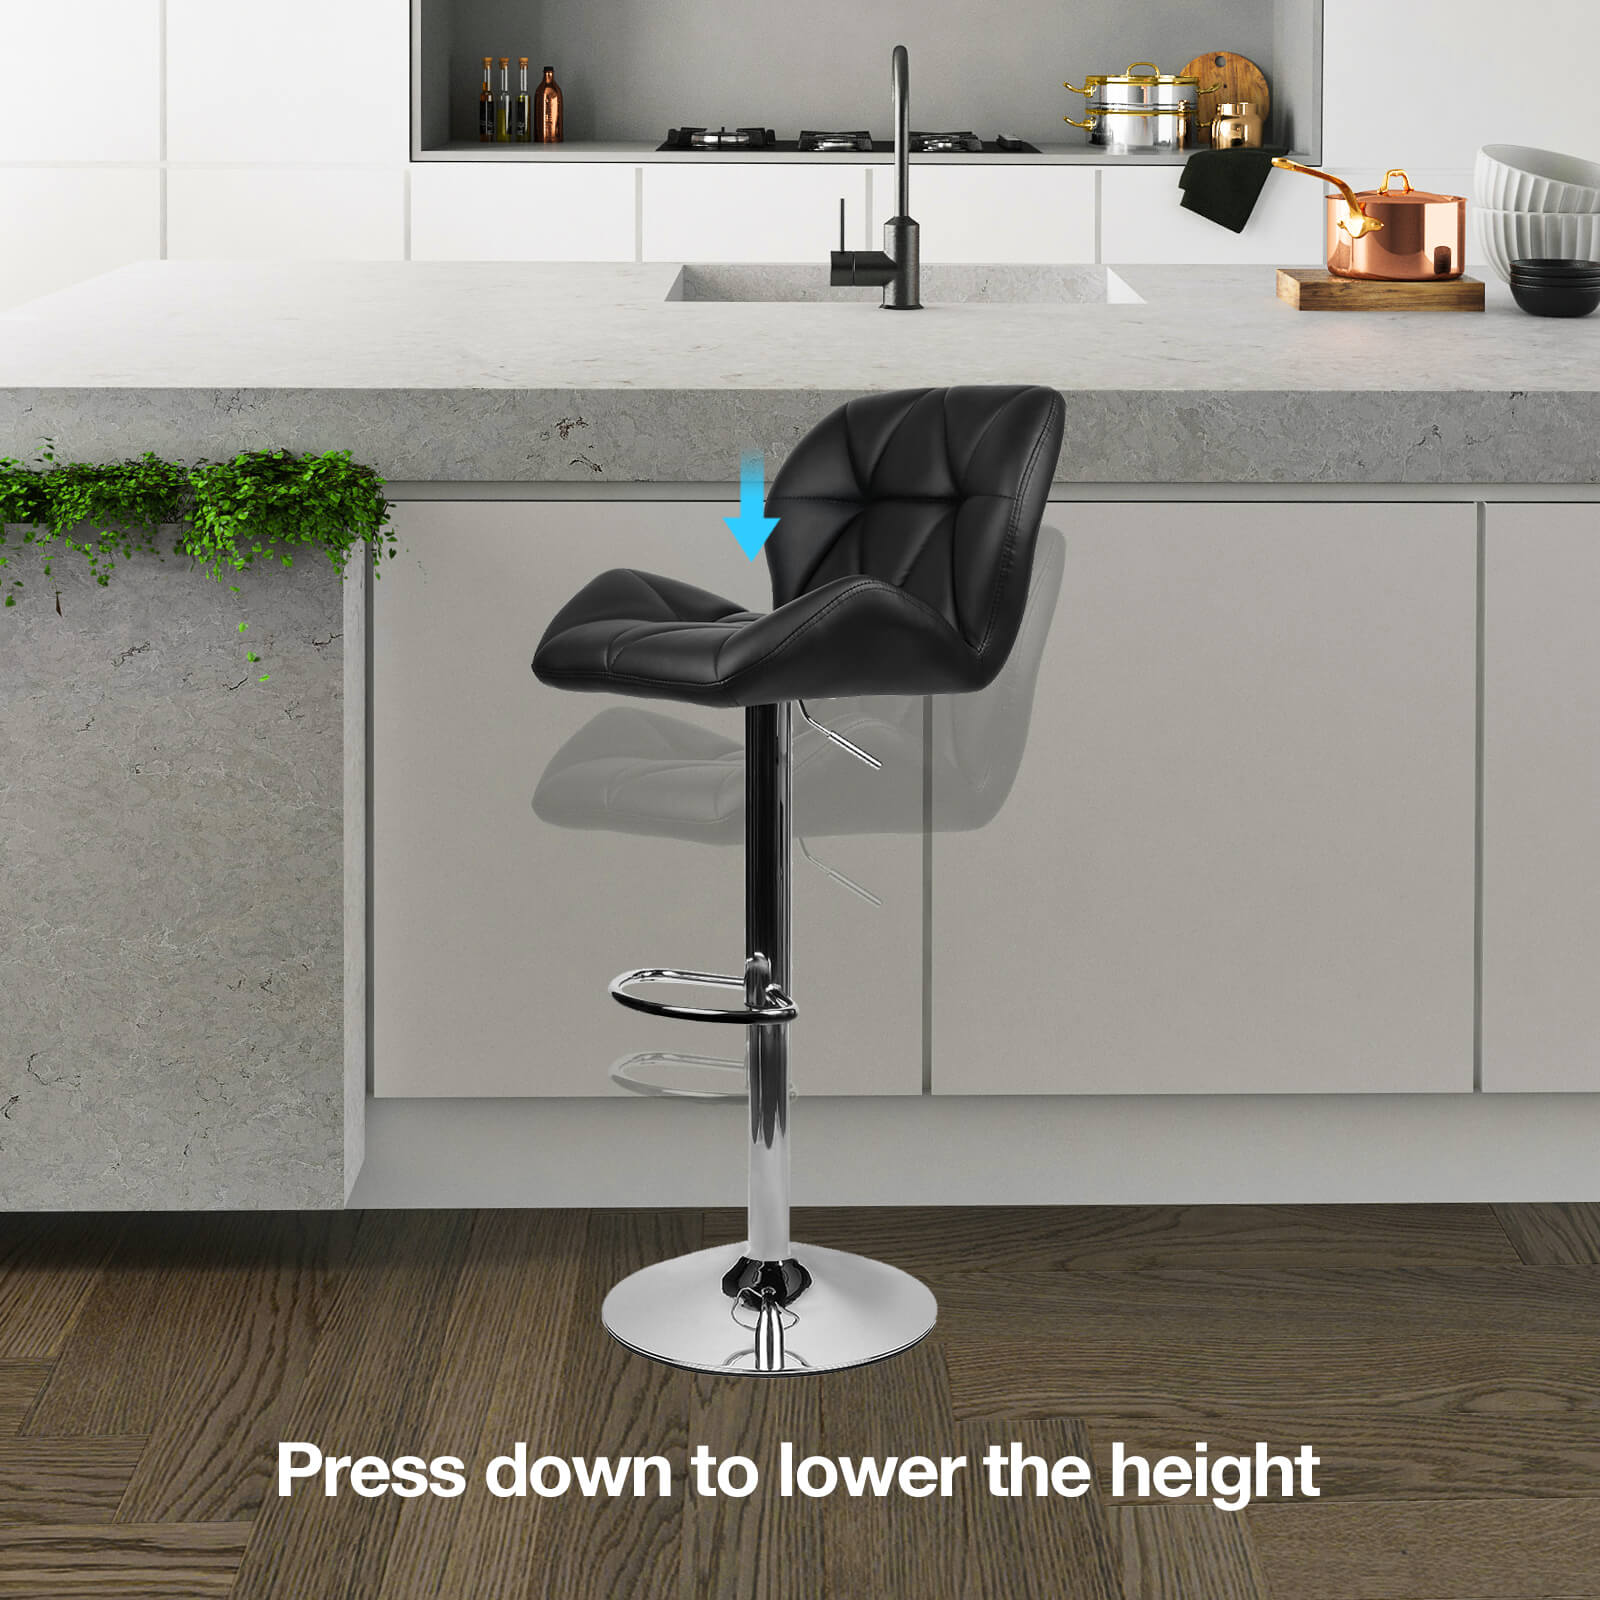 Elecwish black bar stool can press down to lower the height